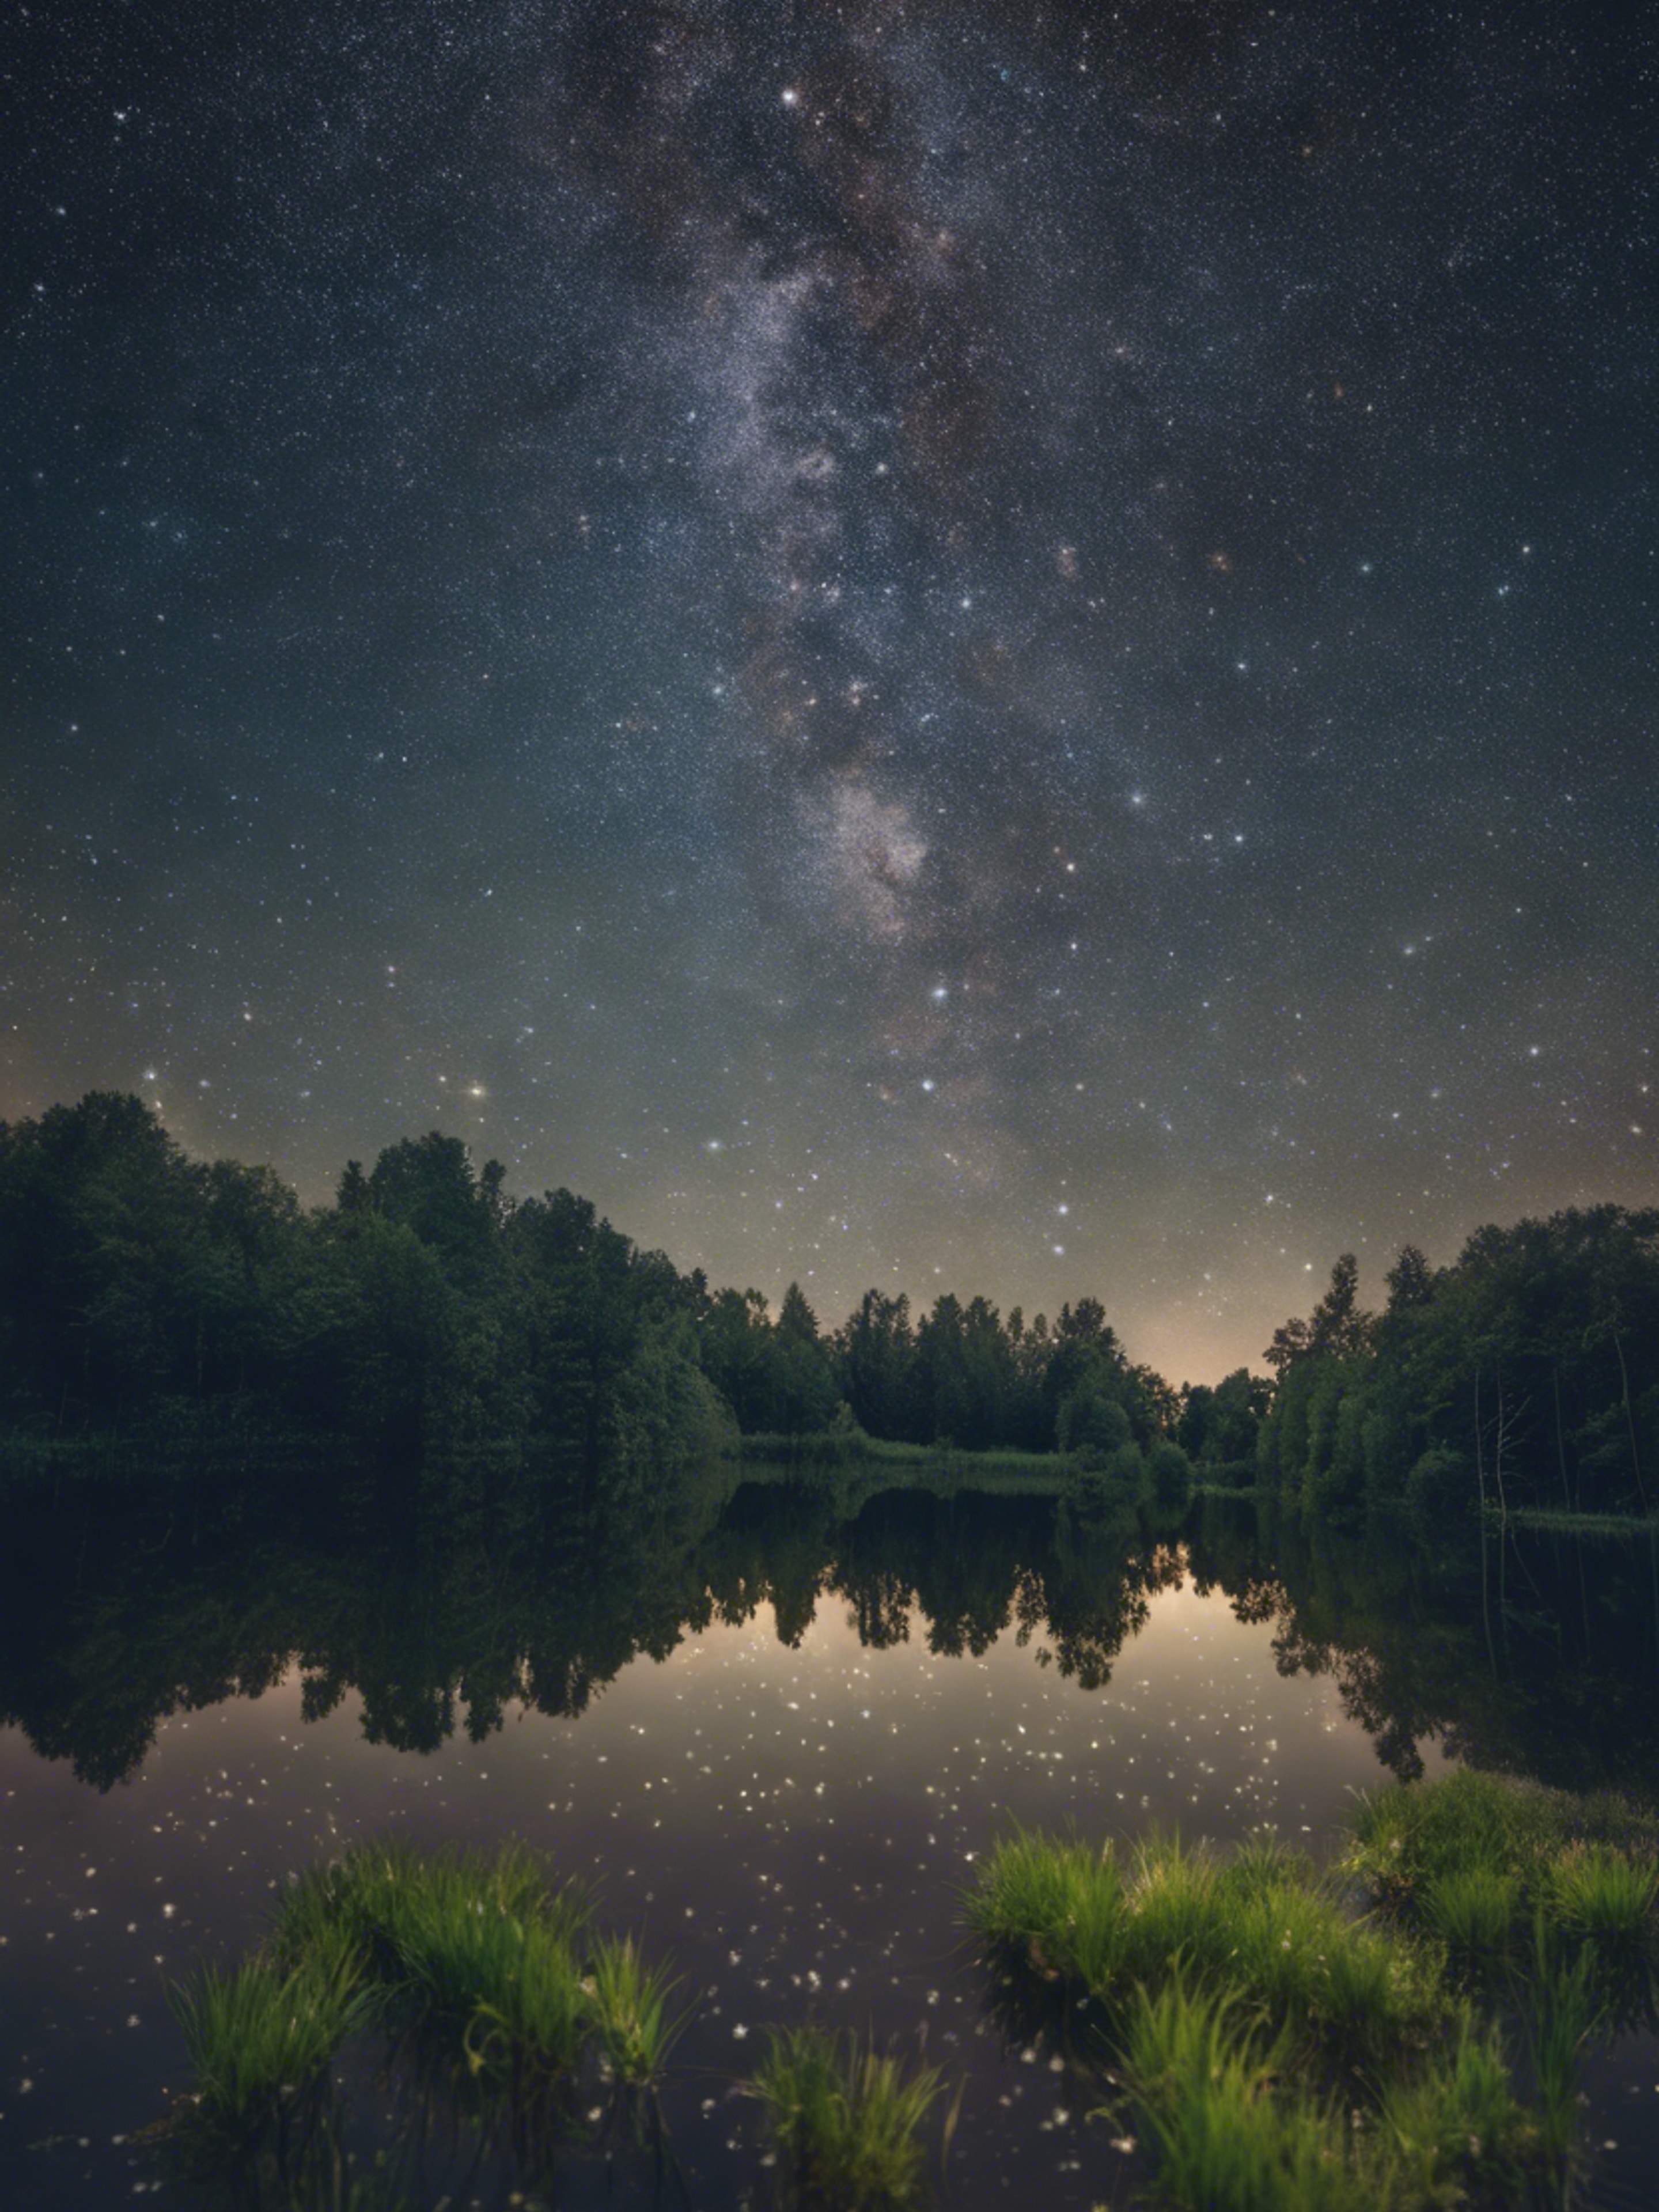 A starry summer night over the pristine waters of a pond located deep in a French country forest.壁紙[c6d93c2a737c4012904e]